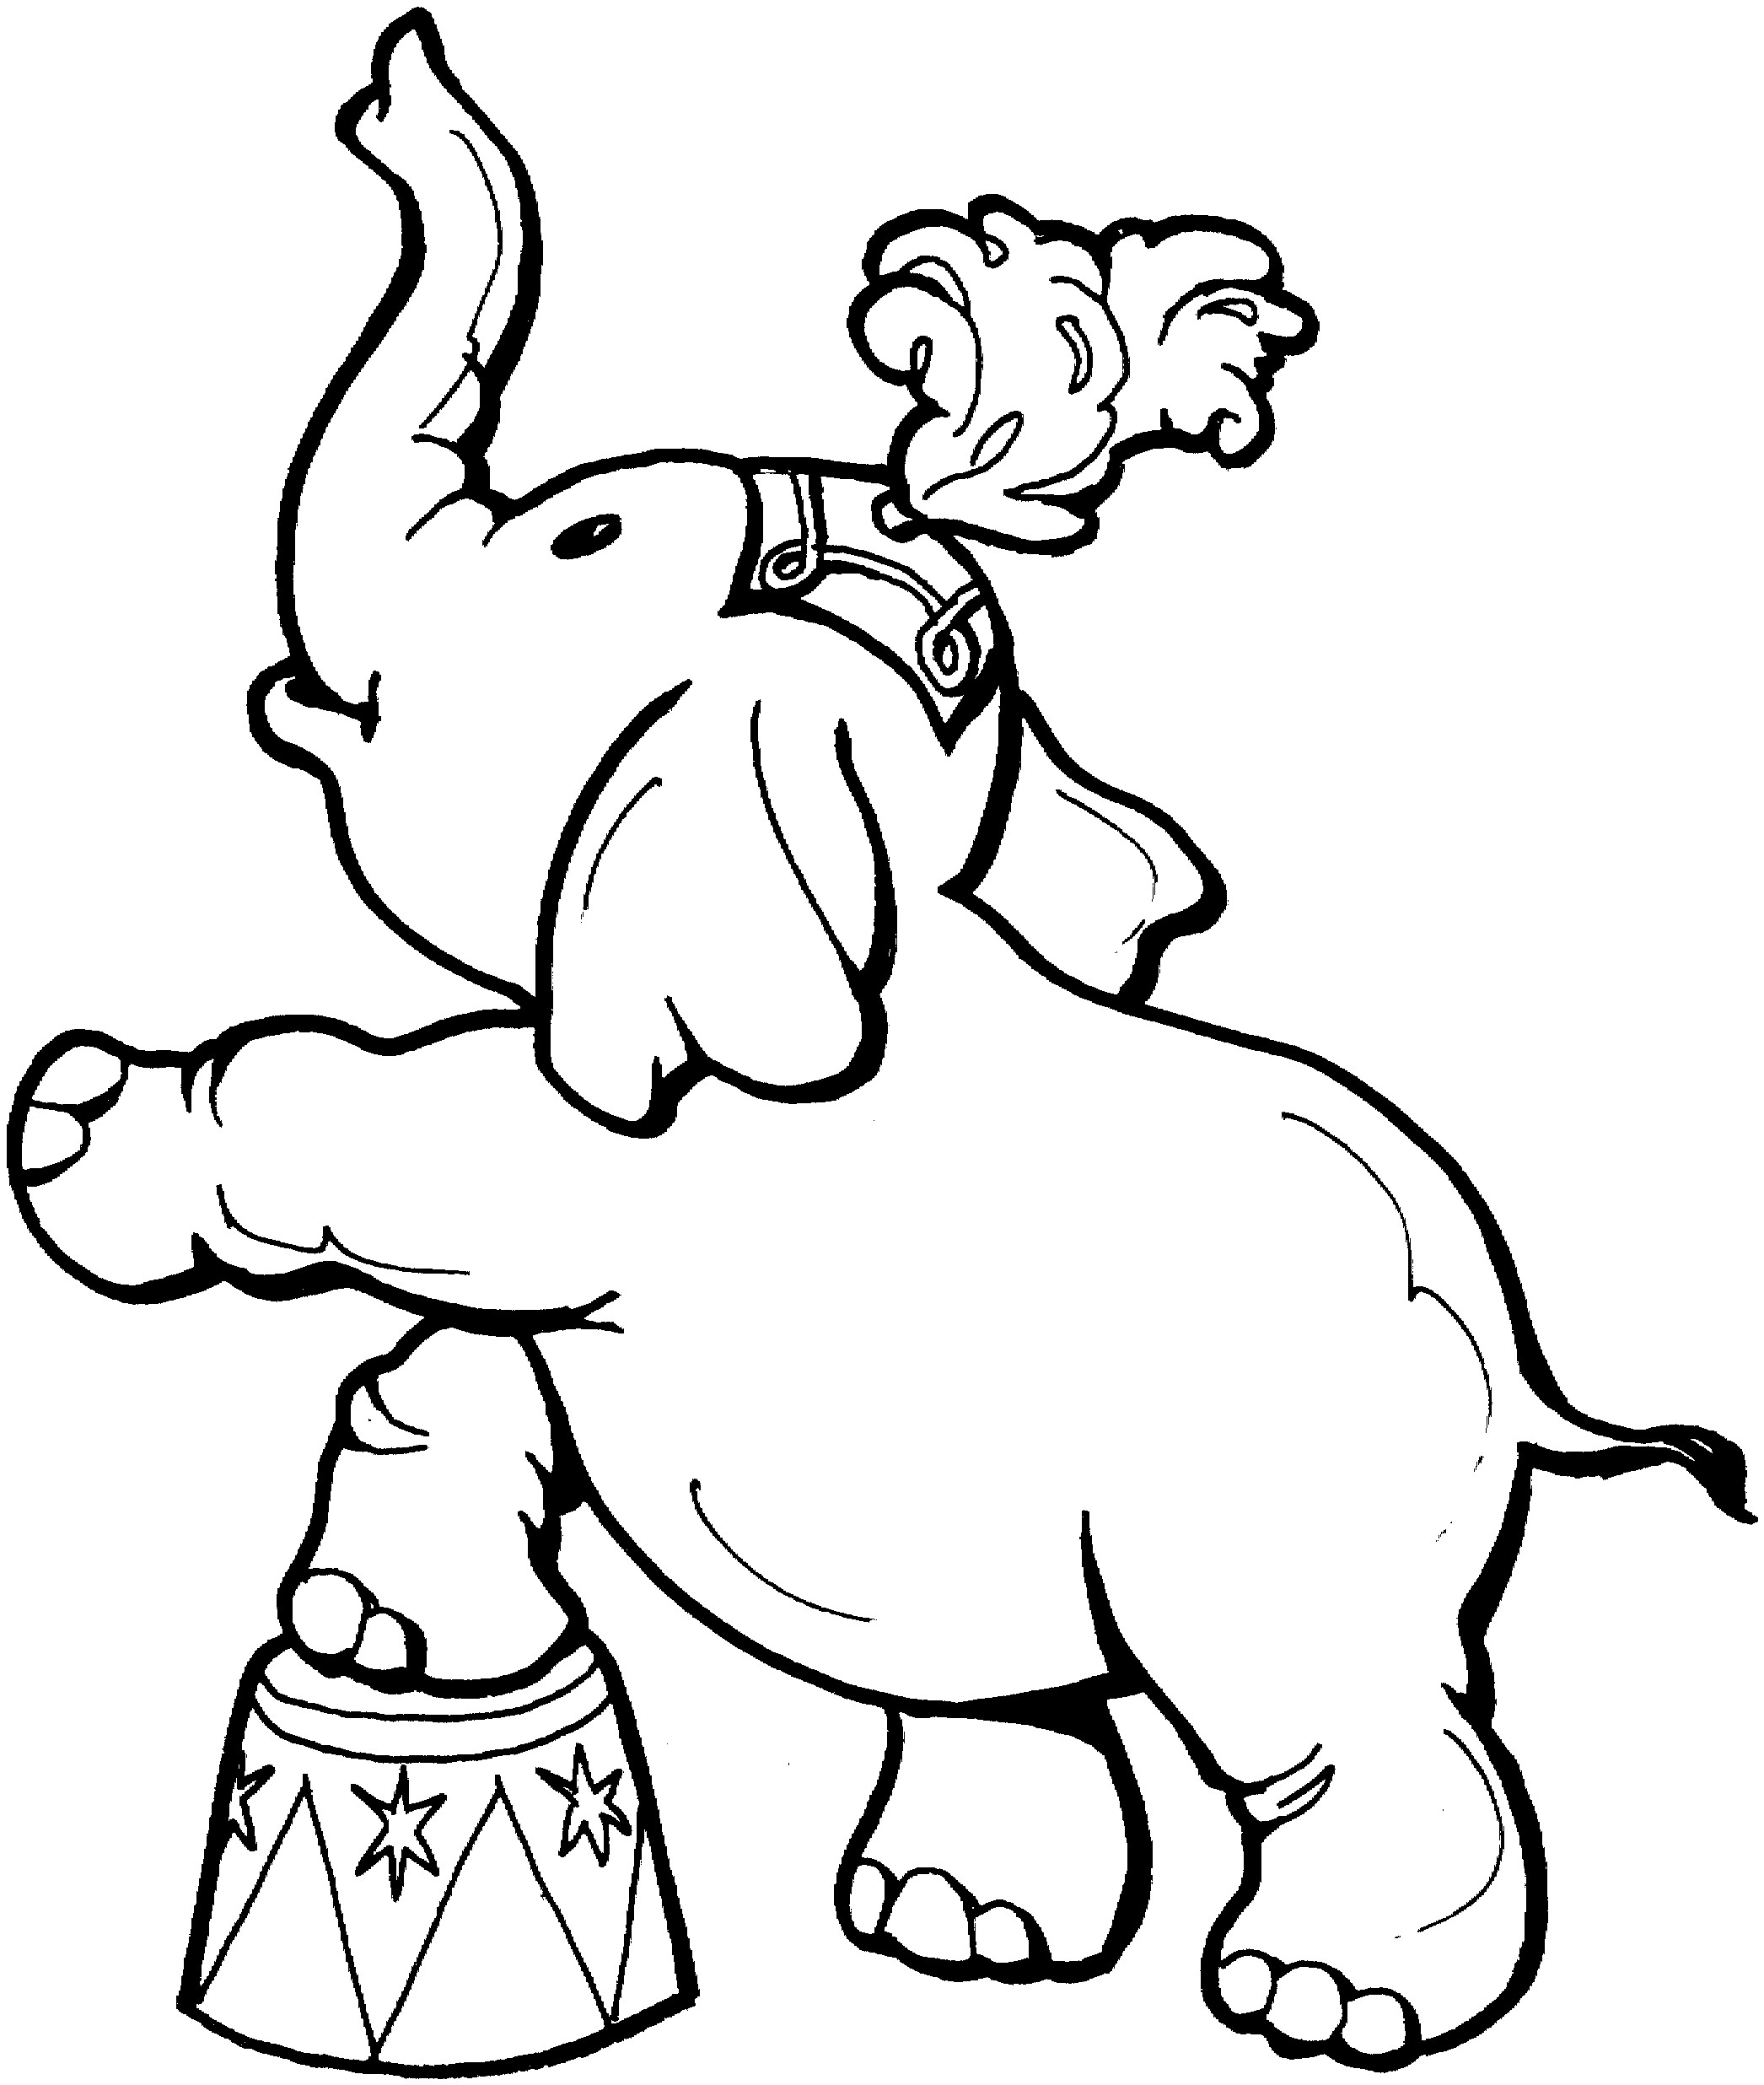 Elephant Coloring Book
 Free Elephant Coloring Pages